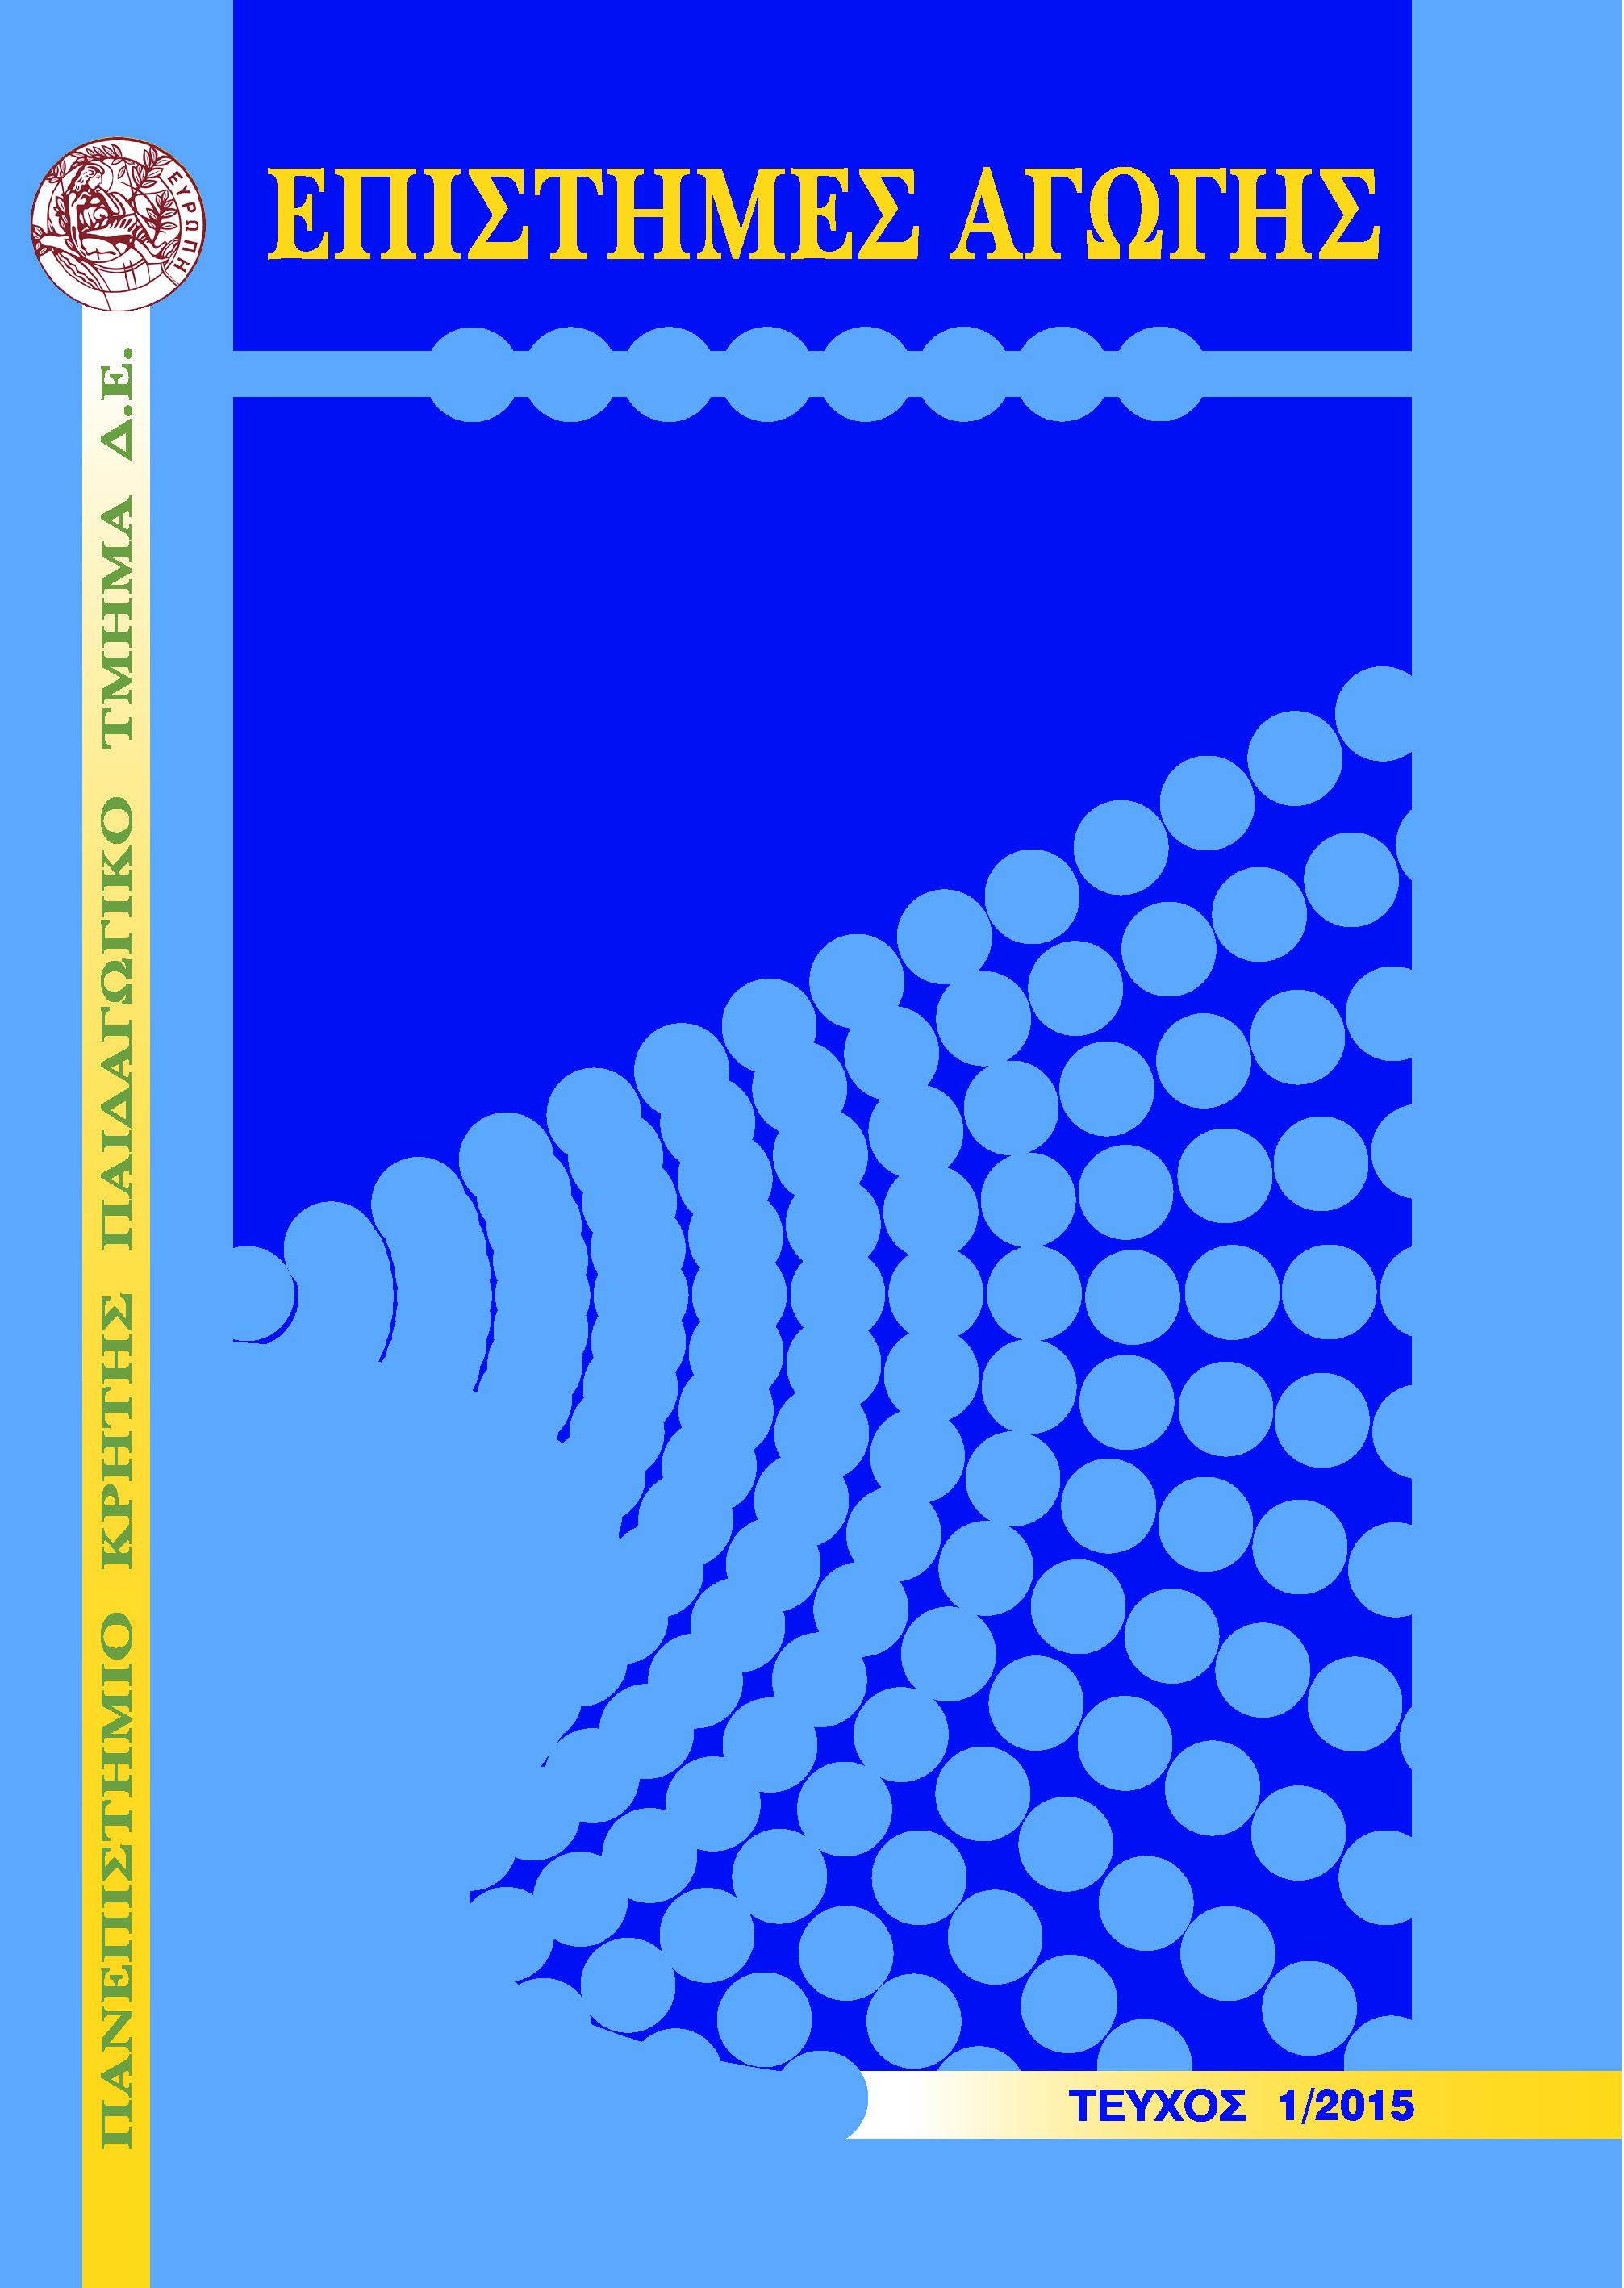 Education Sciences 2015, Issue 1 COVER